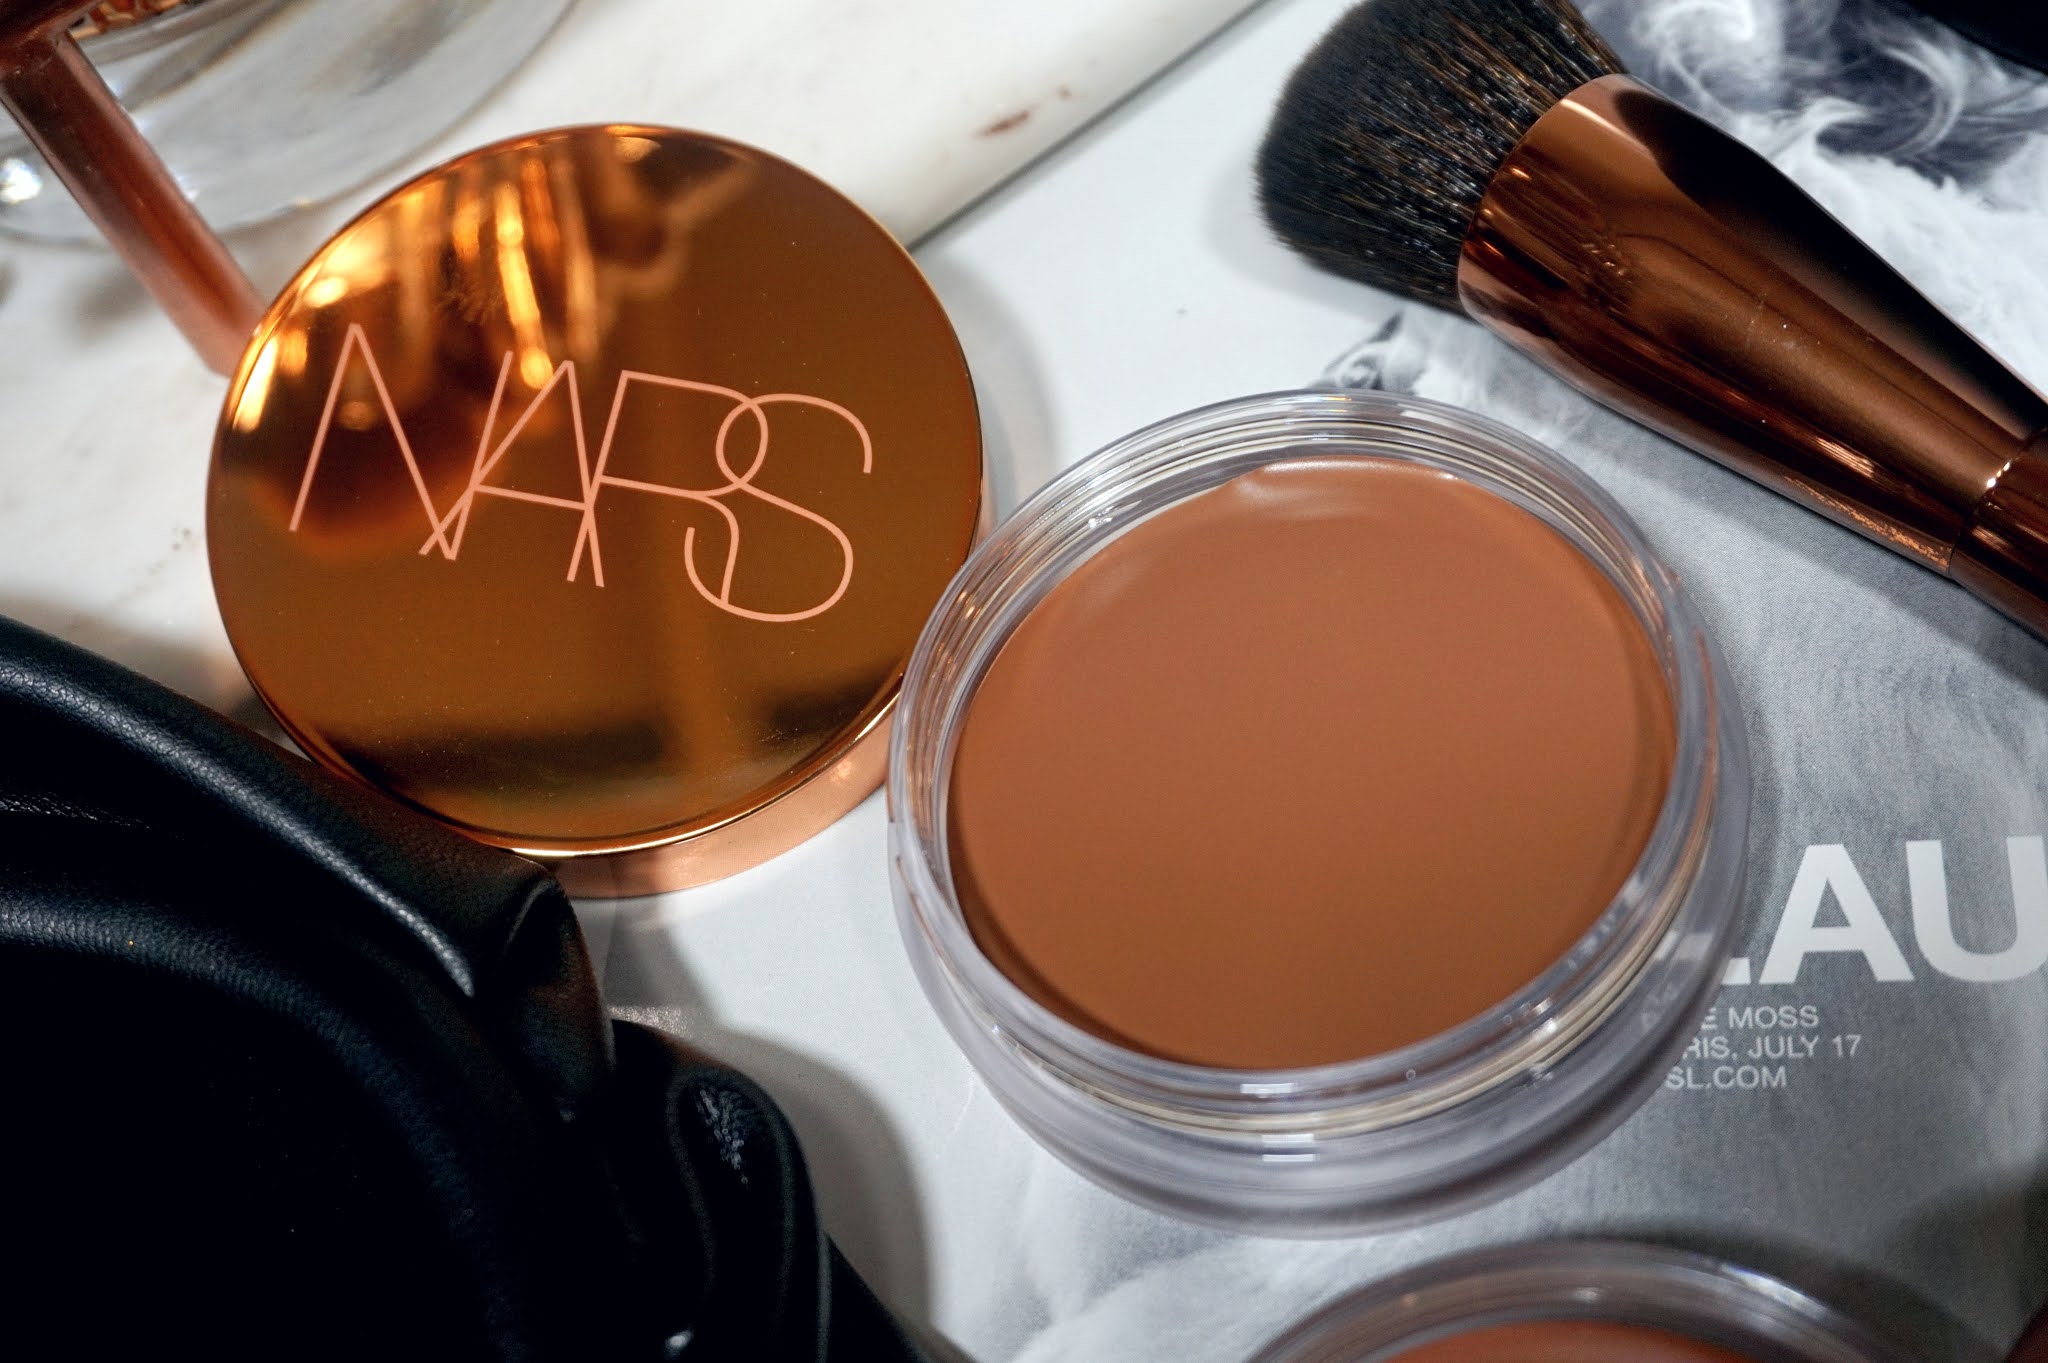 NARS Sunkissed Bronzing Cream Review and Swatches